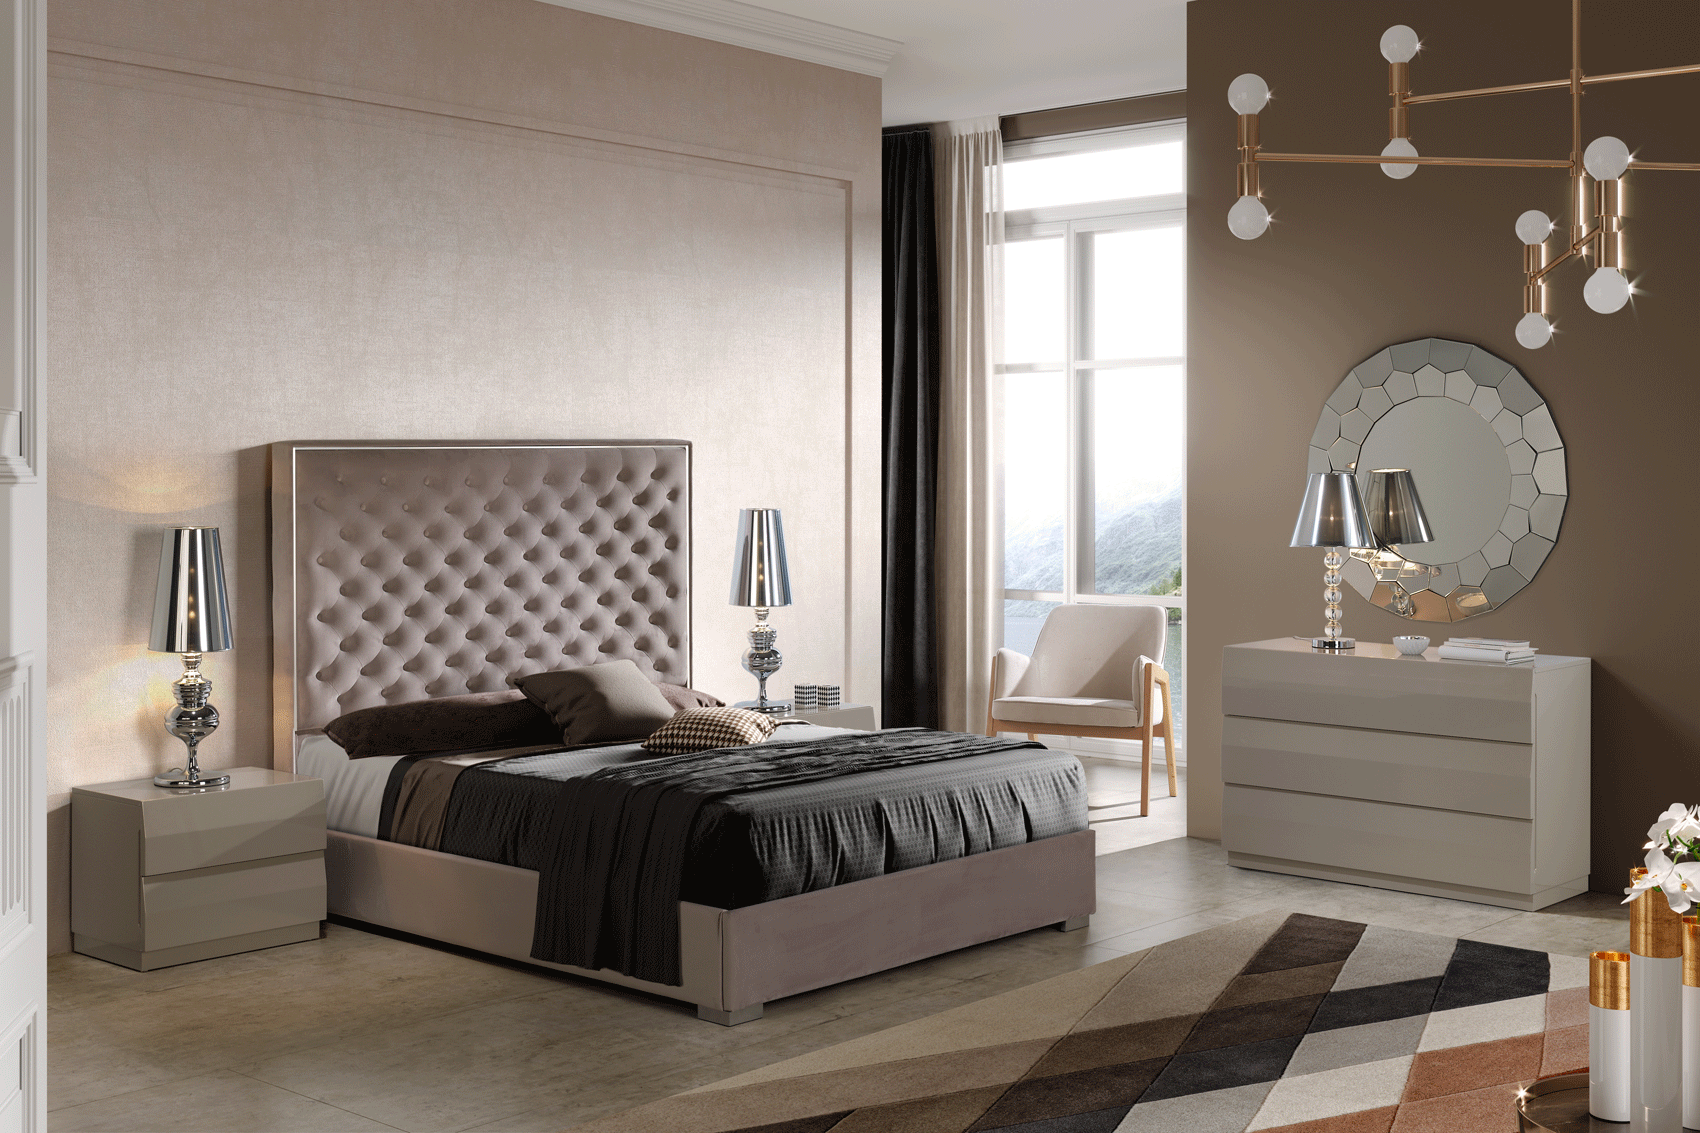 Bedroom Furniture Beds with storage 867 Melody Bed, M-152, C-152, E-413, LT-3130L-C1C